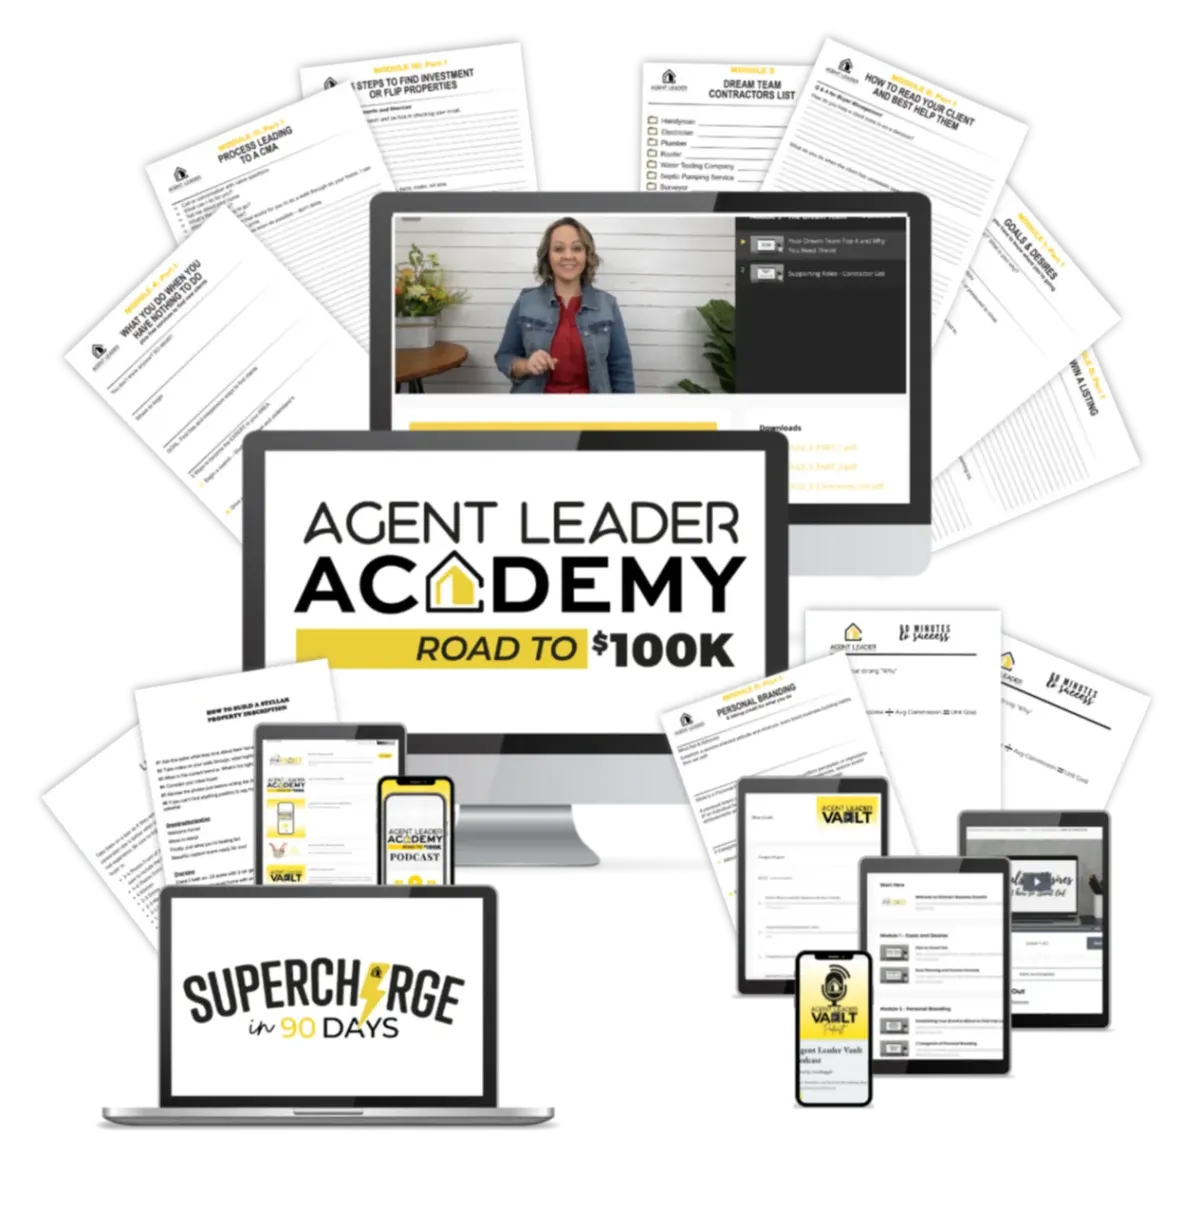 Agent Leader Academy offer stack: Courses, worksheets, and tools for real estate success.